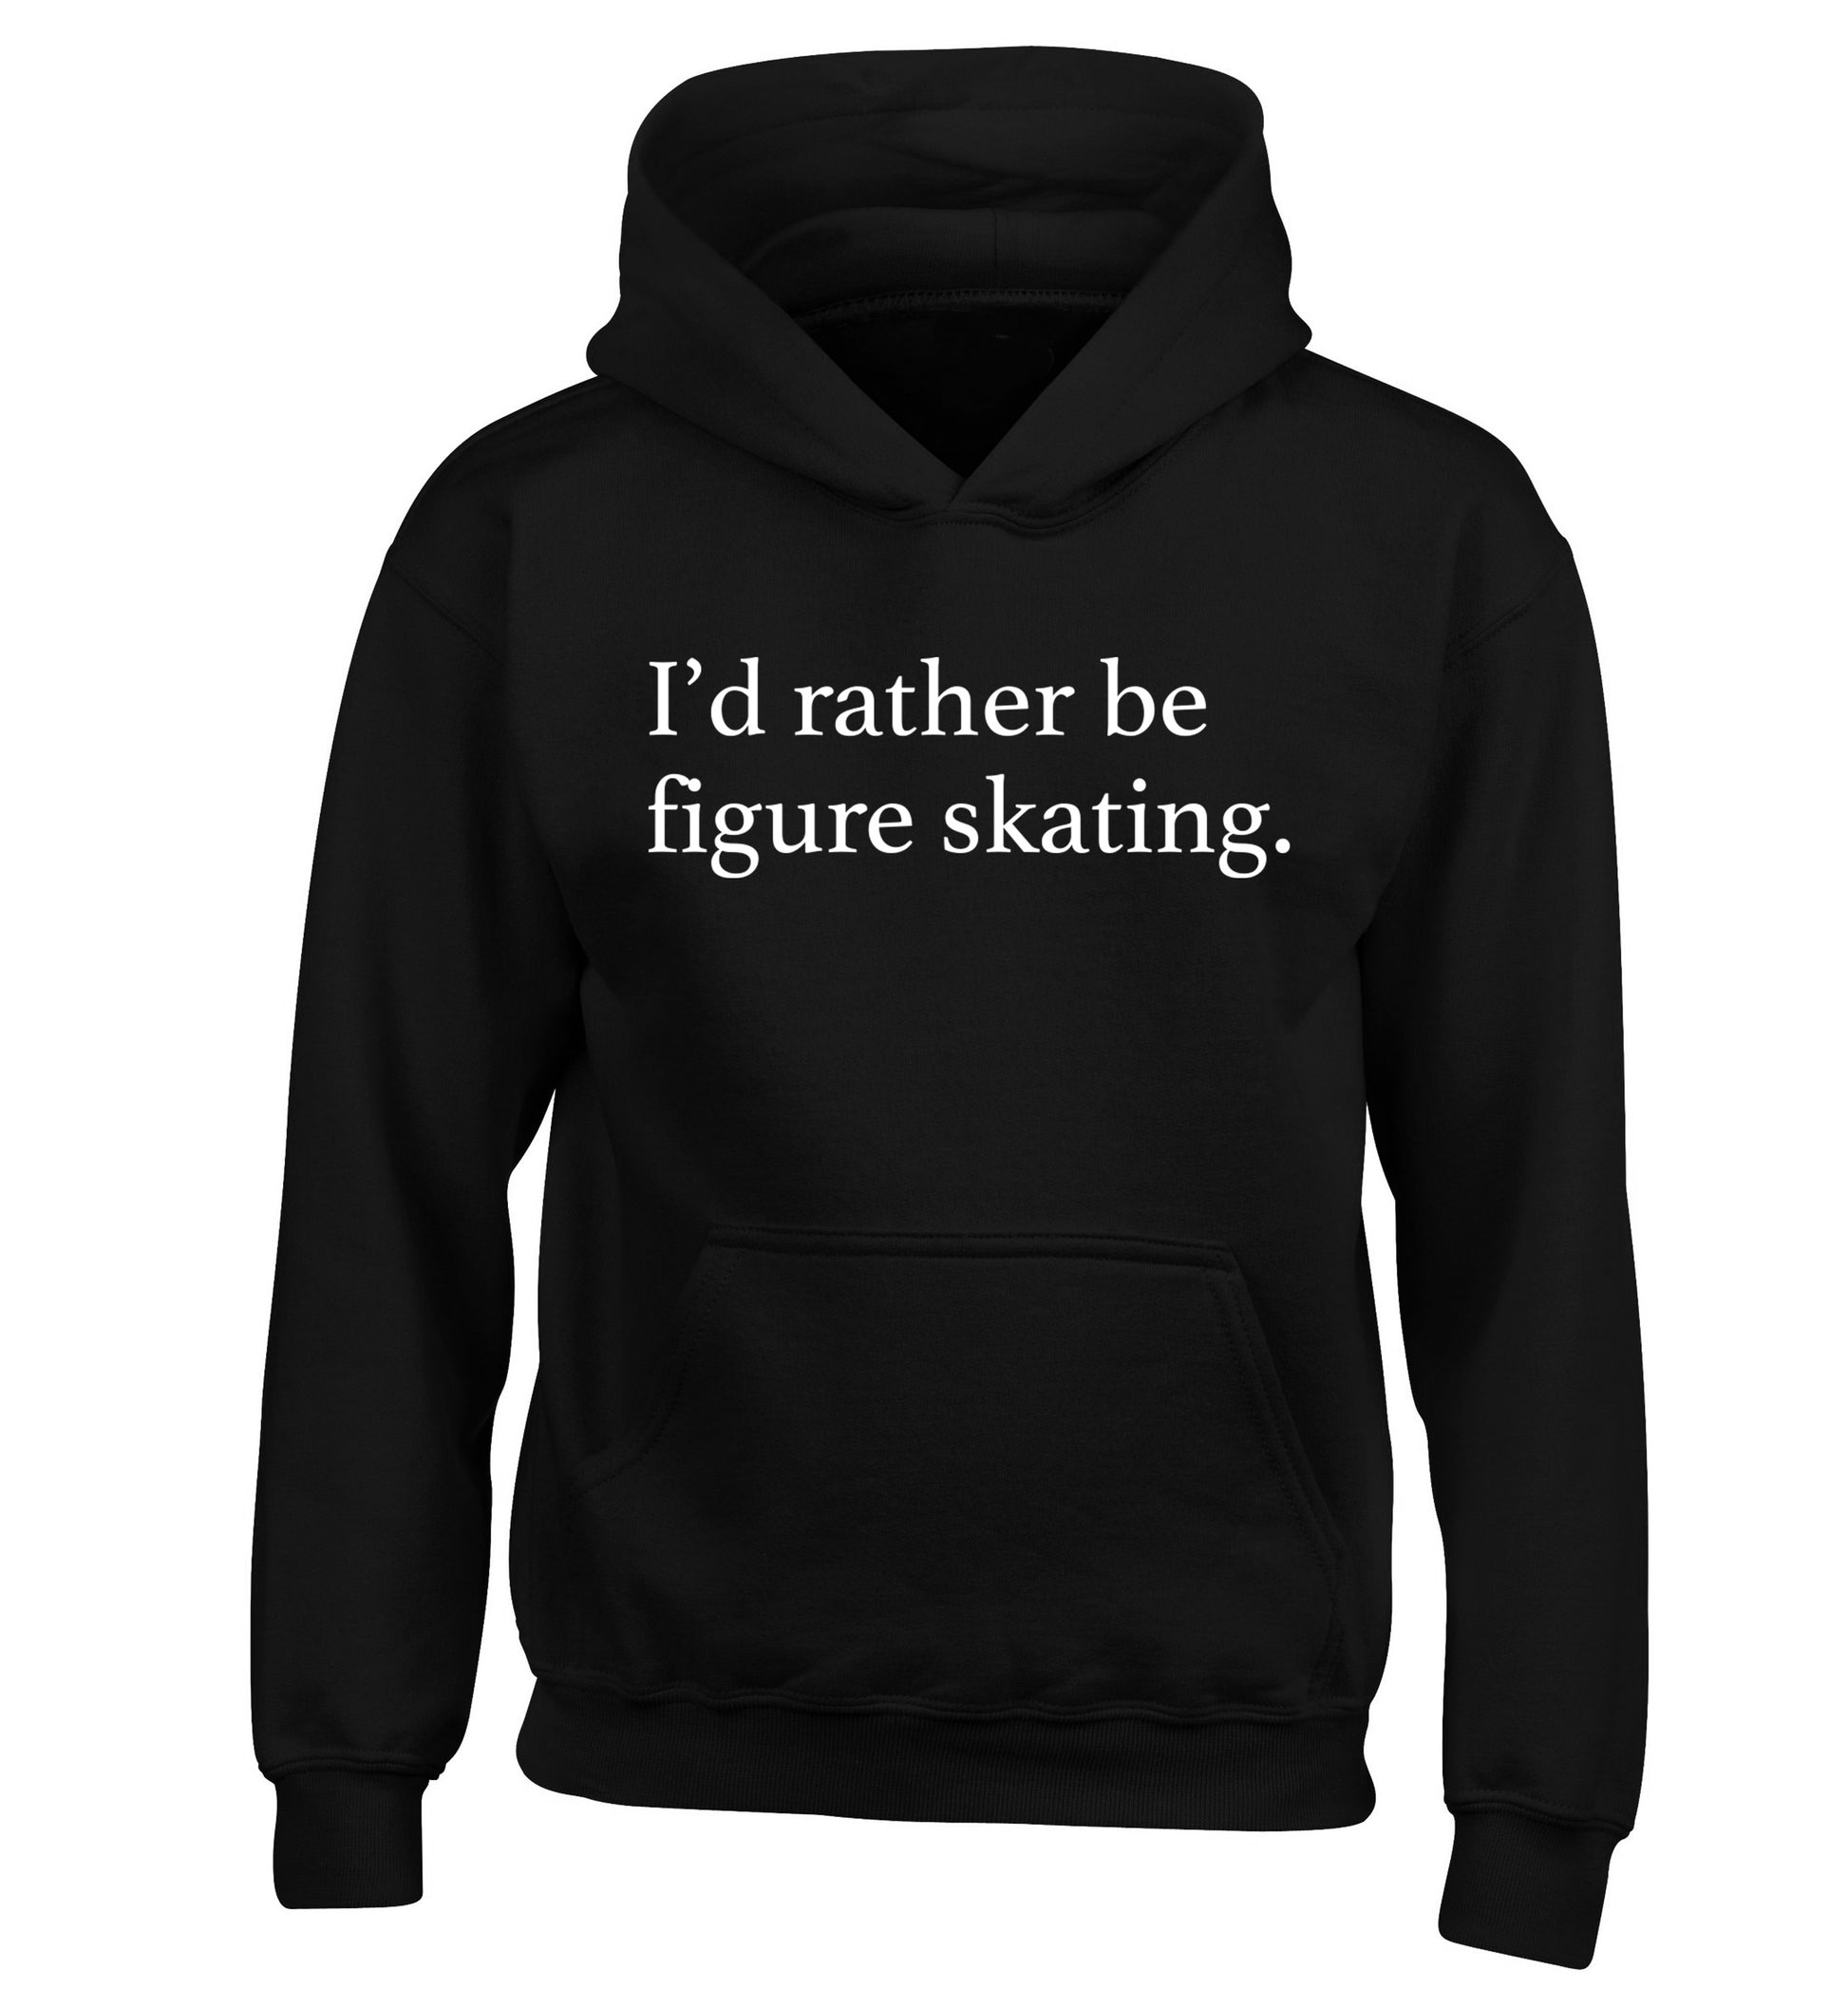 I'd rather be figure skating children's black hoodie 12-14 Years